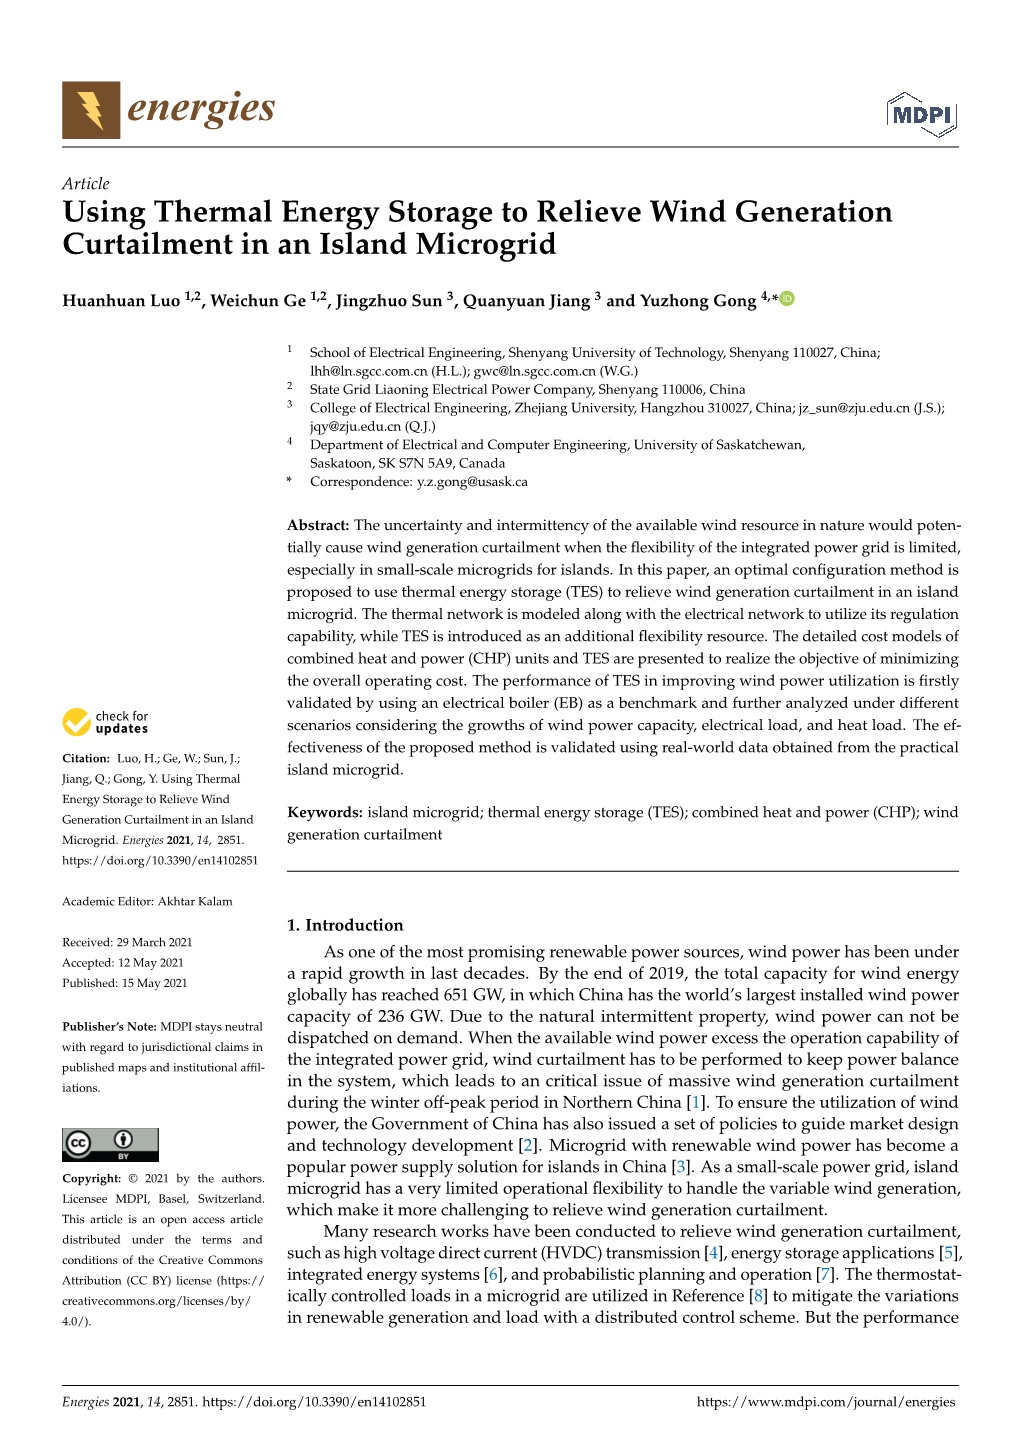 Using Thermal Energy Storage to Relieve Wind Generation Curtailment in an Island Microgrid